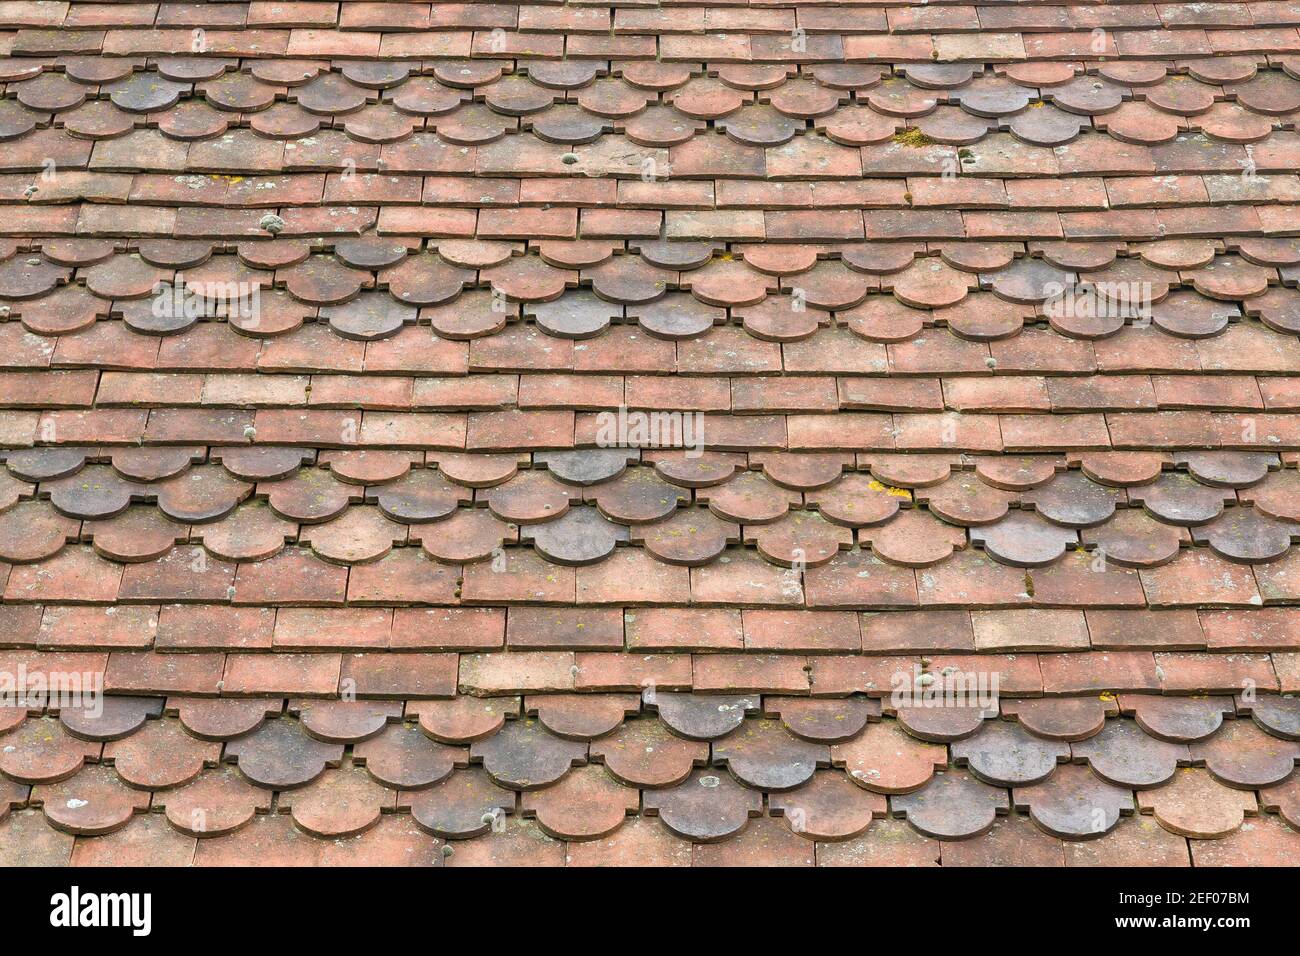 Club roof tiles texture, fish scale roof tiles on a house, scalloped pattern close up, UK Stock Photo